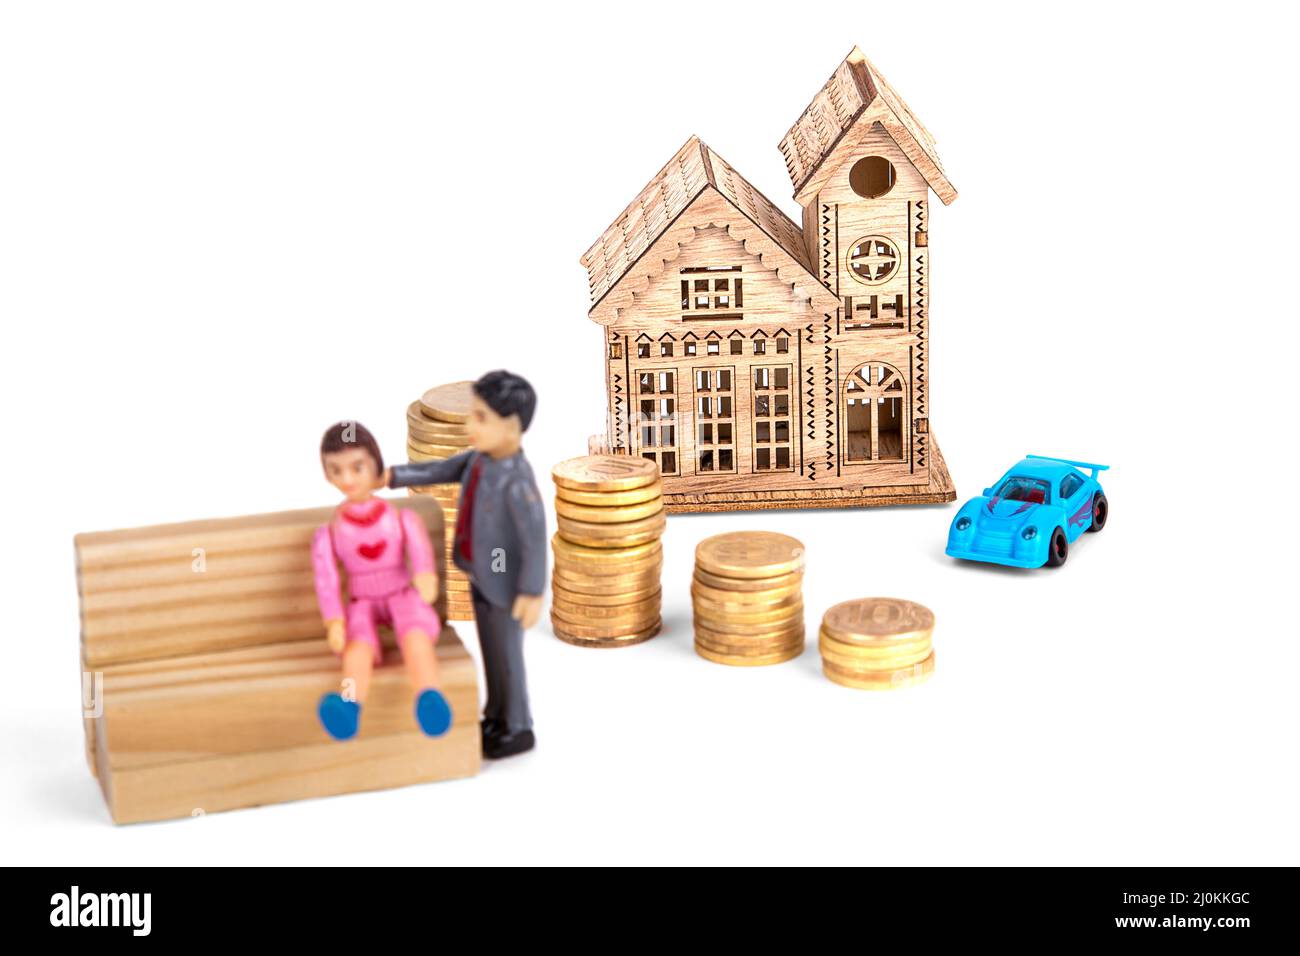 Blurred figures of people, against the background of a wooden house with a car and stacks of coins, on a white background Stock Photo